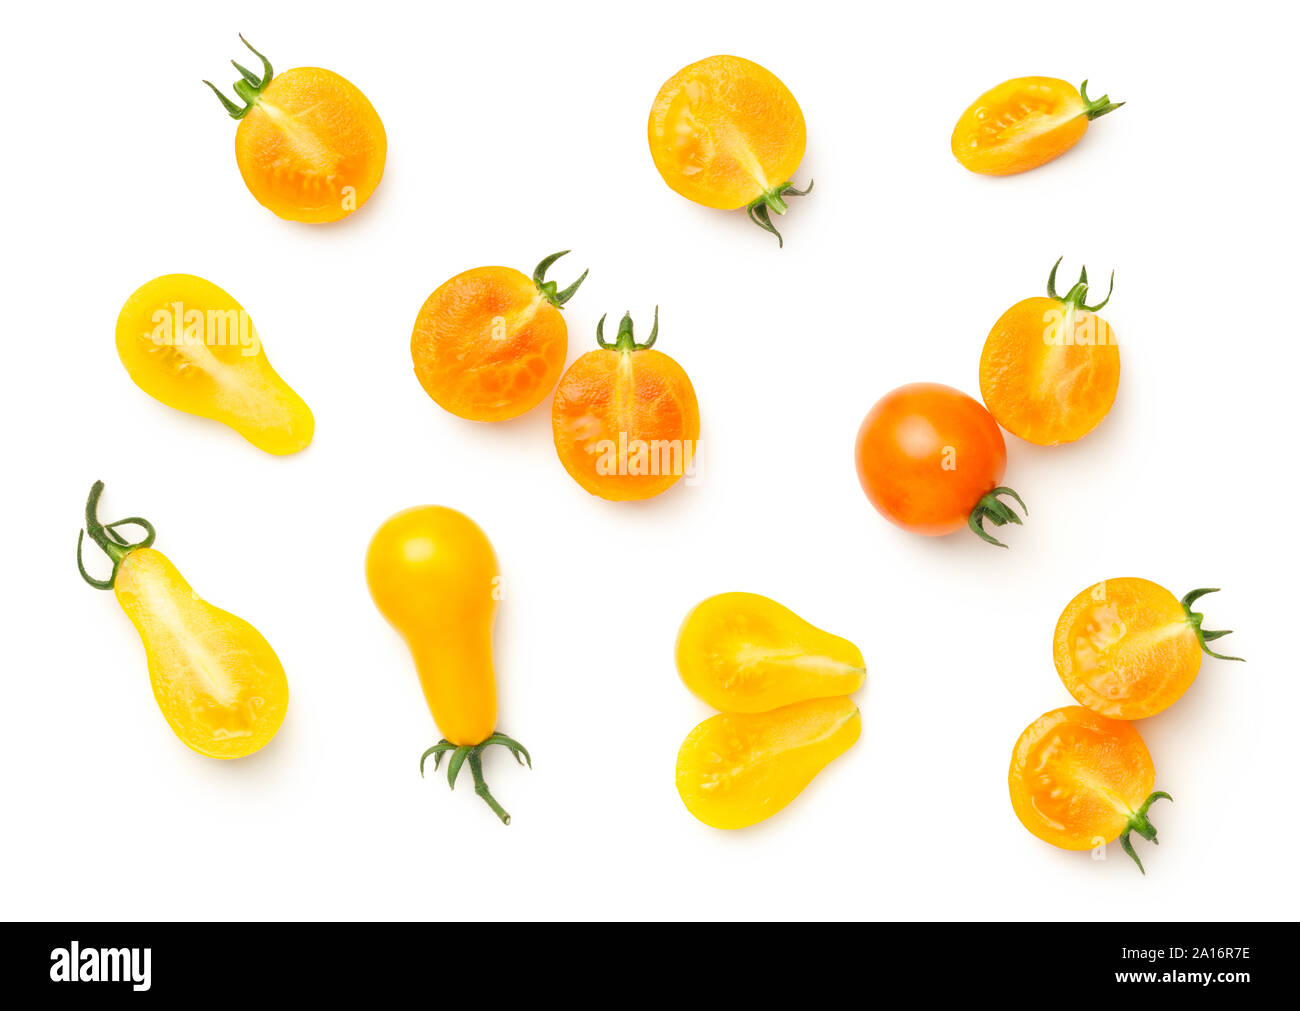 Cherry tomatoes isolated on white background. Yellow pear, isis candy cherry tomato. Top view, flat lay Stock Photo